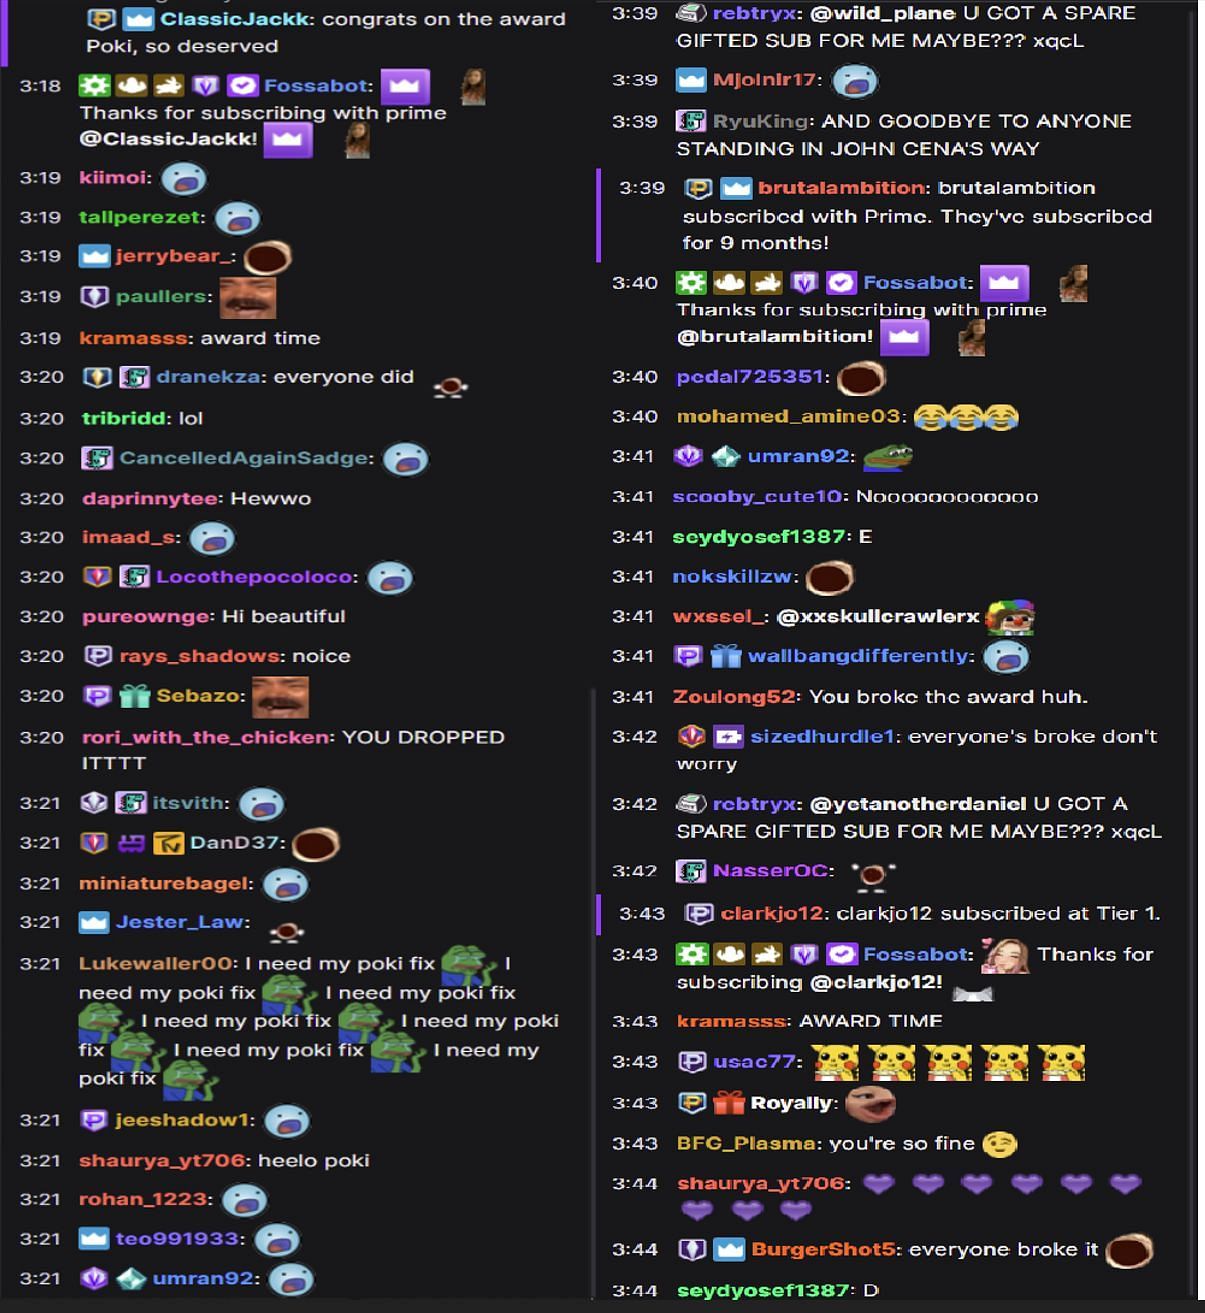 Chat members reacting to the streamer&#039;s disclosure (Images via Pokimanelol/Twitch chat)